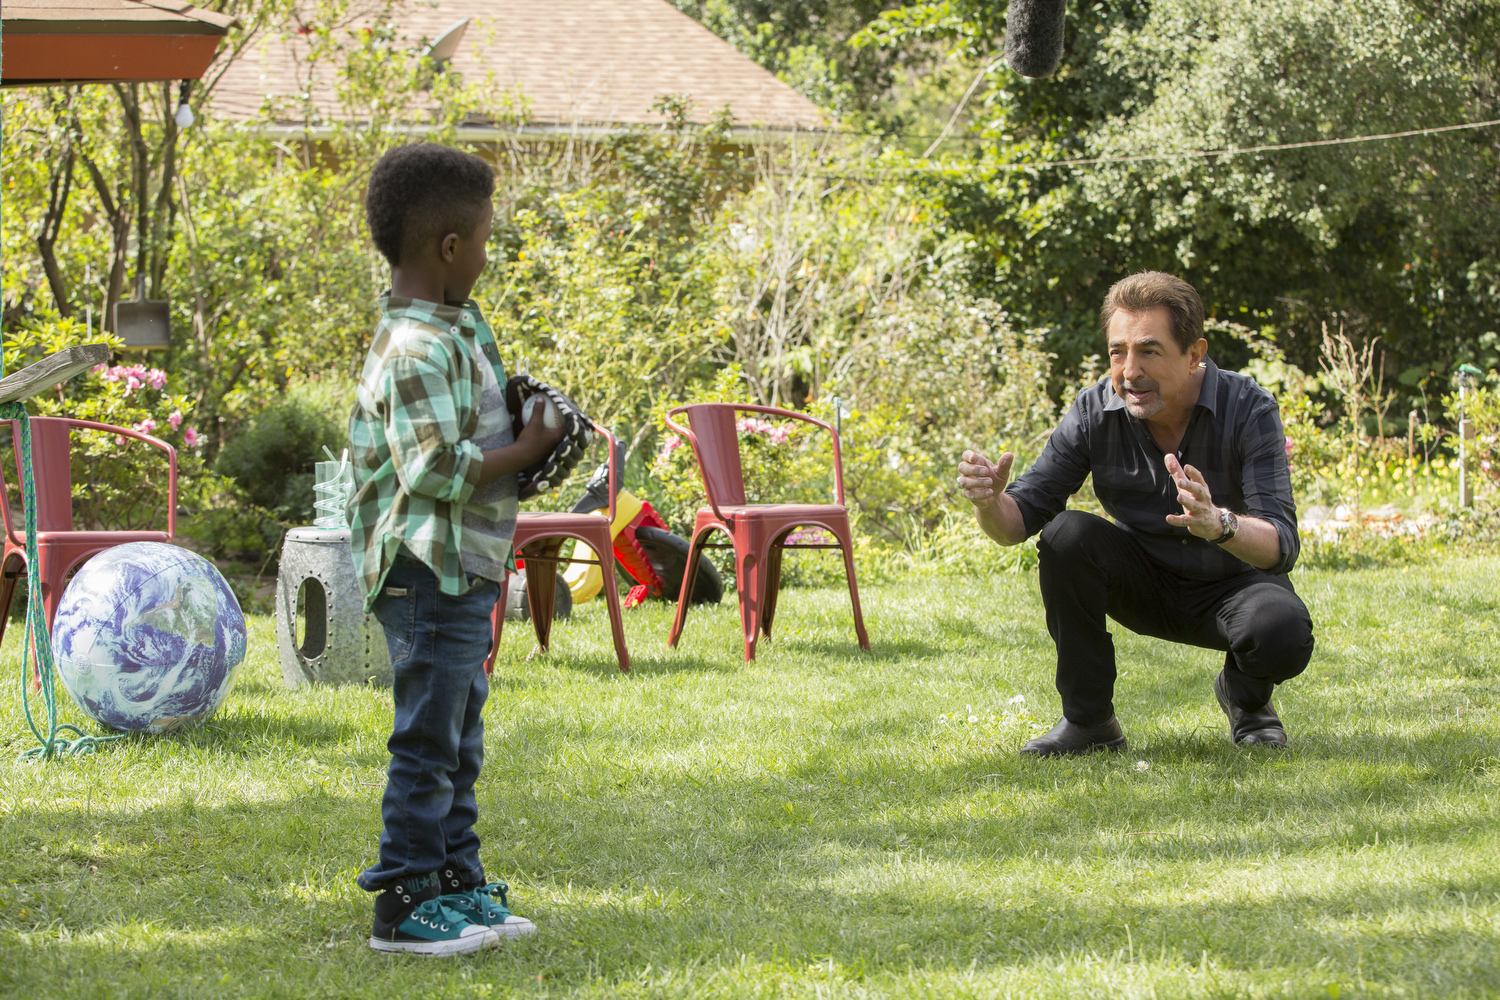 First Look: Rossi Reflects On His Past In Criminal Minds, 'Inner Beaut...